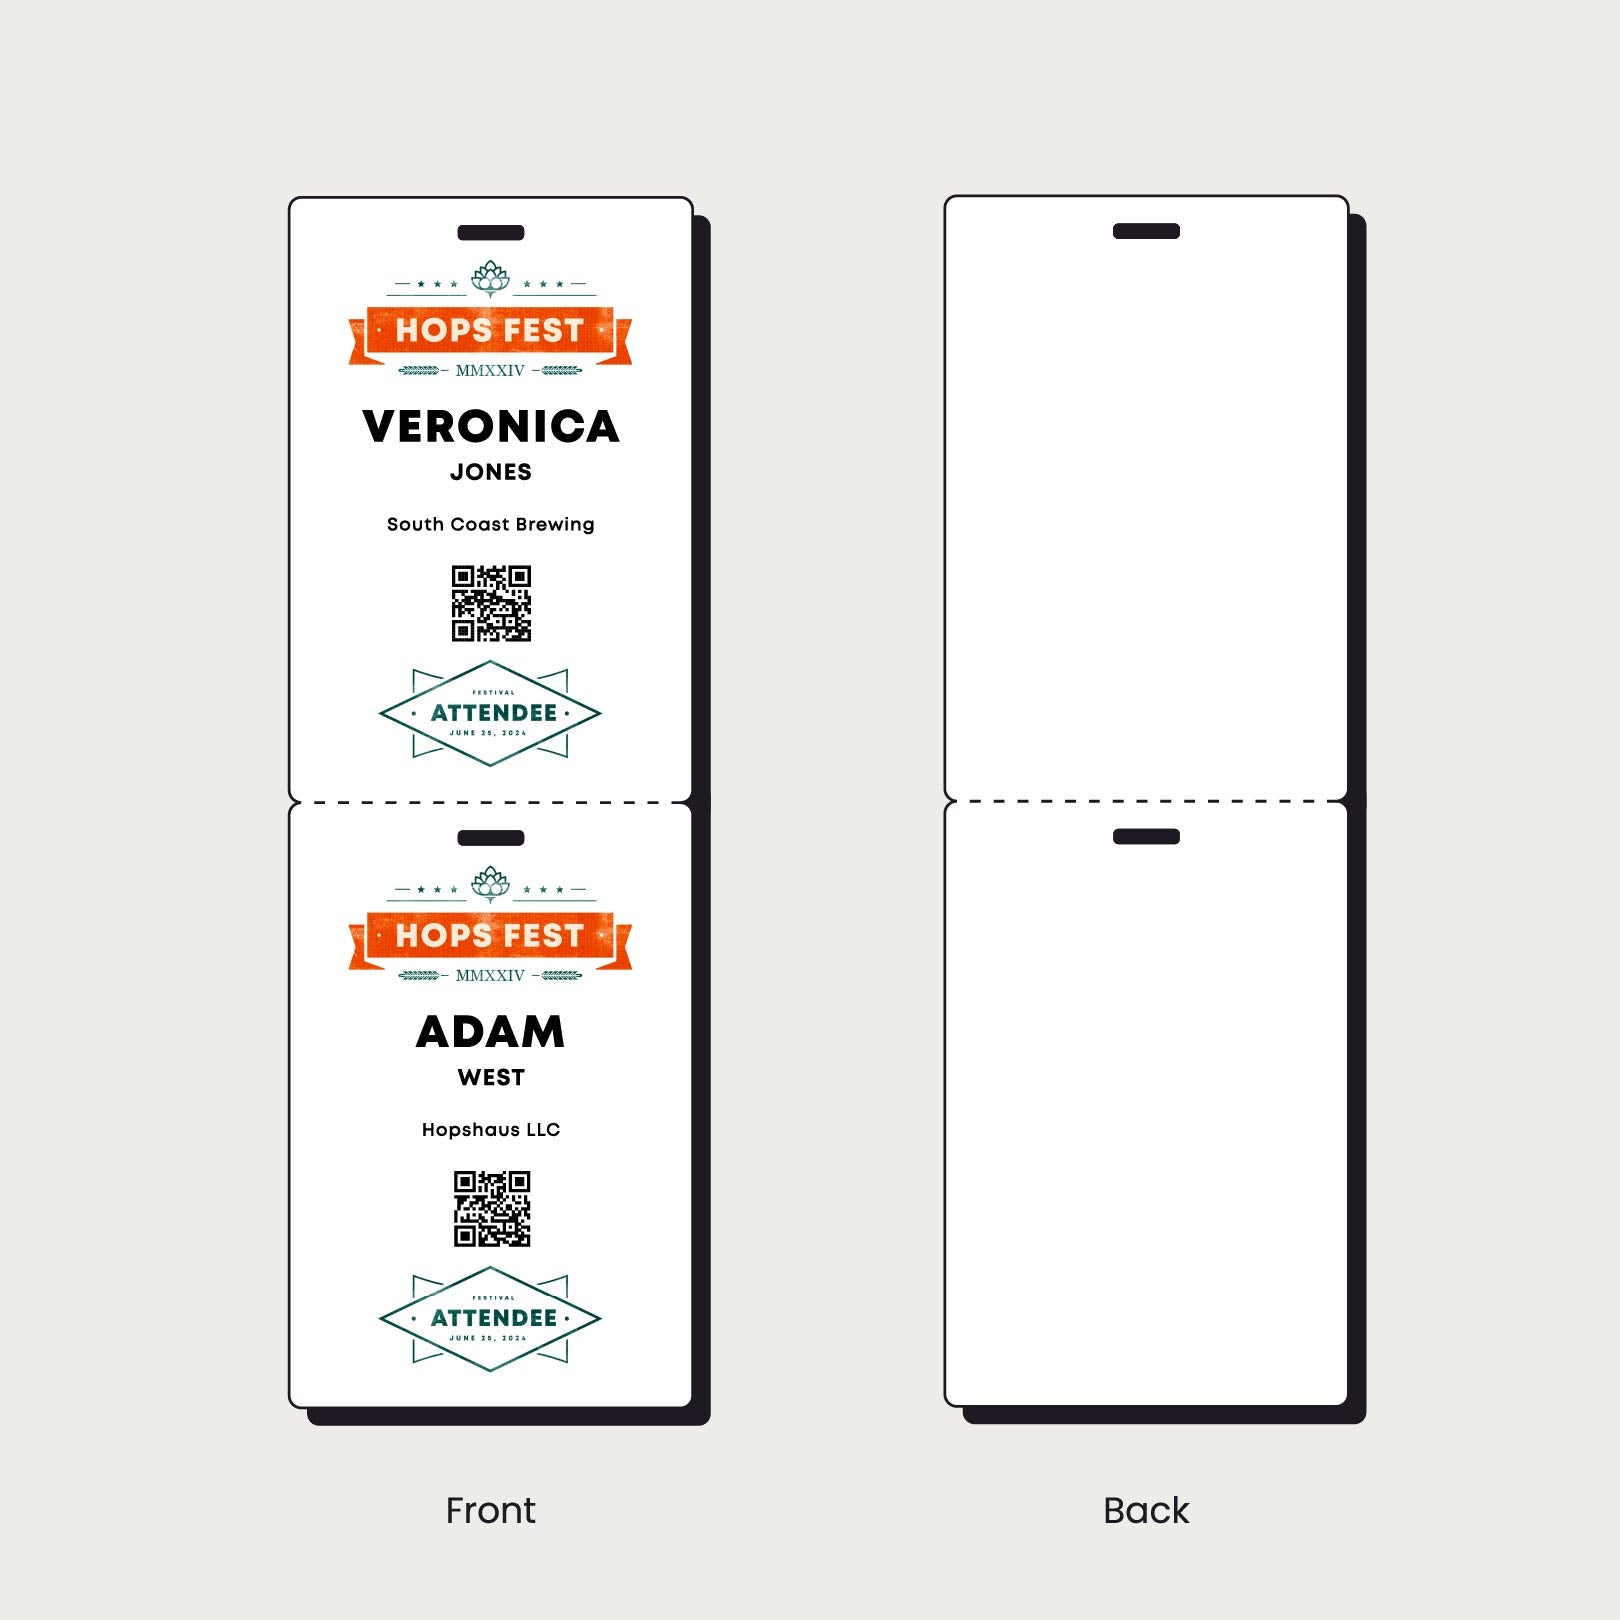 4x6 Paper Event Badge, Single-Sided, Single Notch